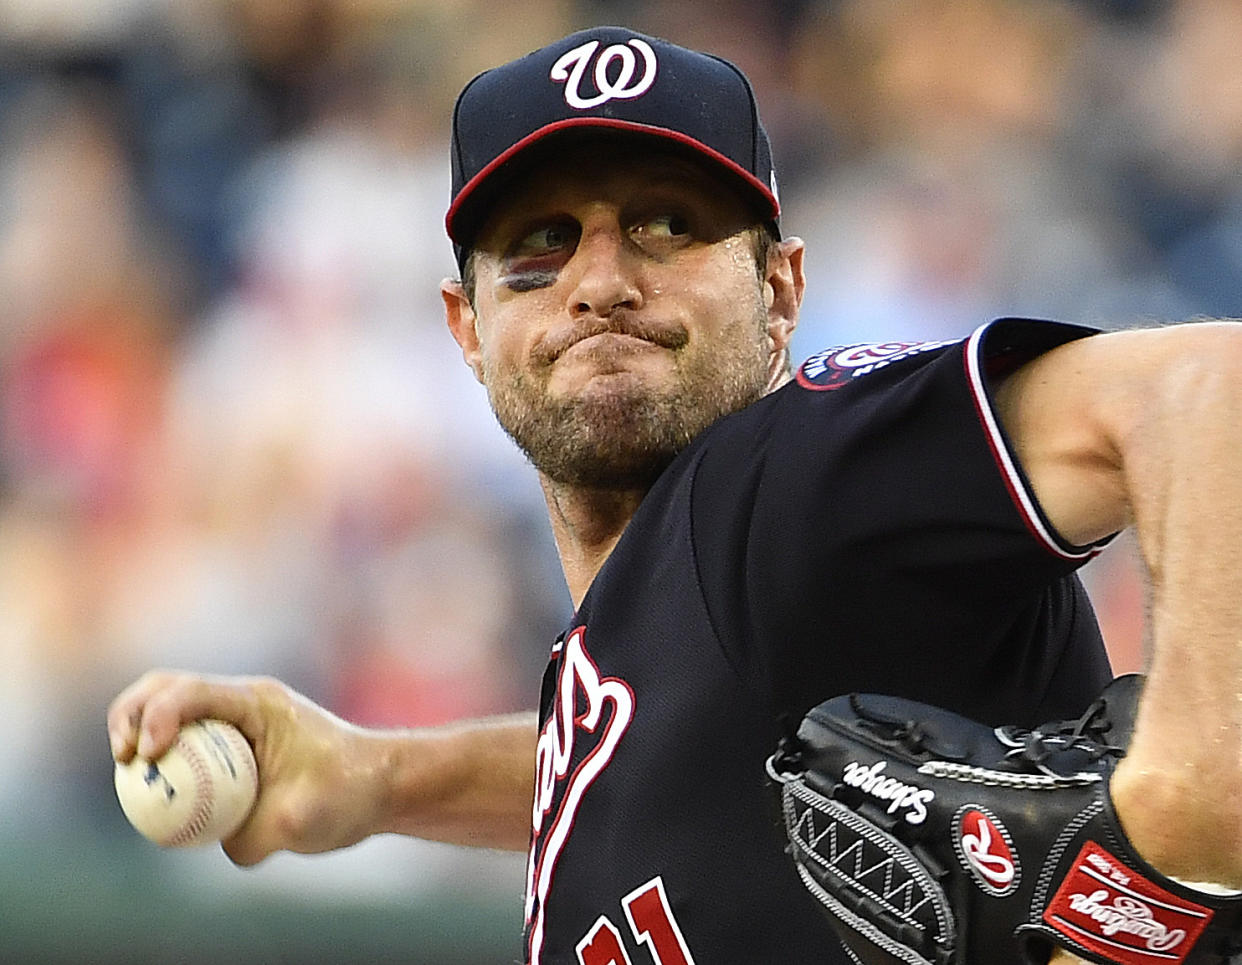 Despite having a broken nose and massive black eye, Max Scherzer opted to take the mound against the Phillies Wednesday -- and he pitched a gem. (Reuters)